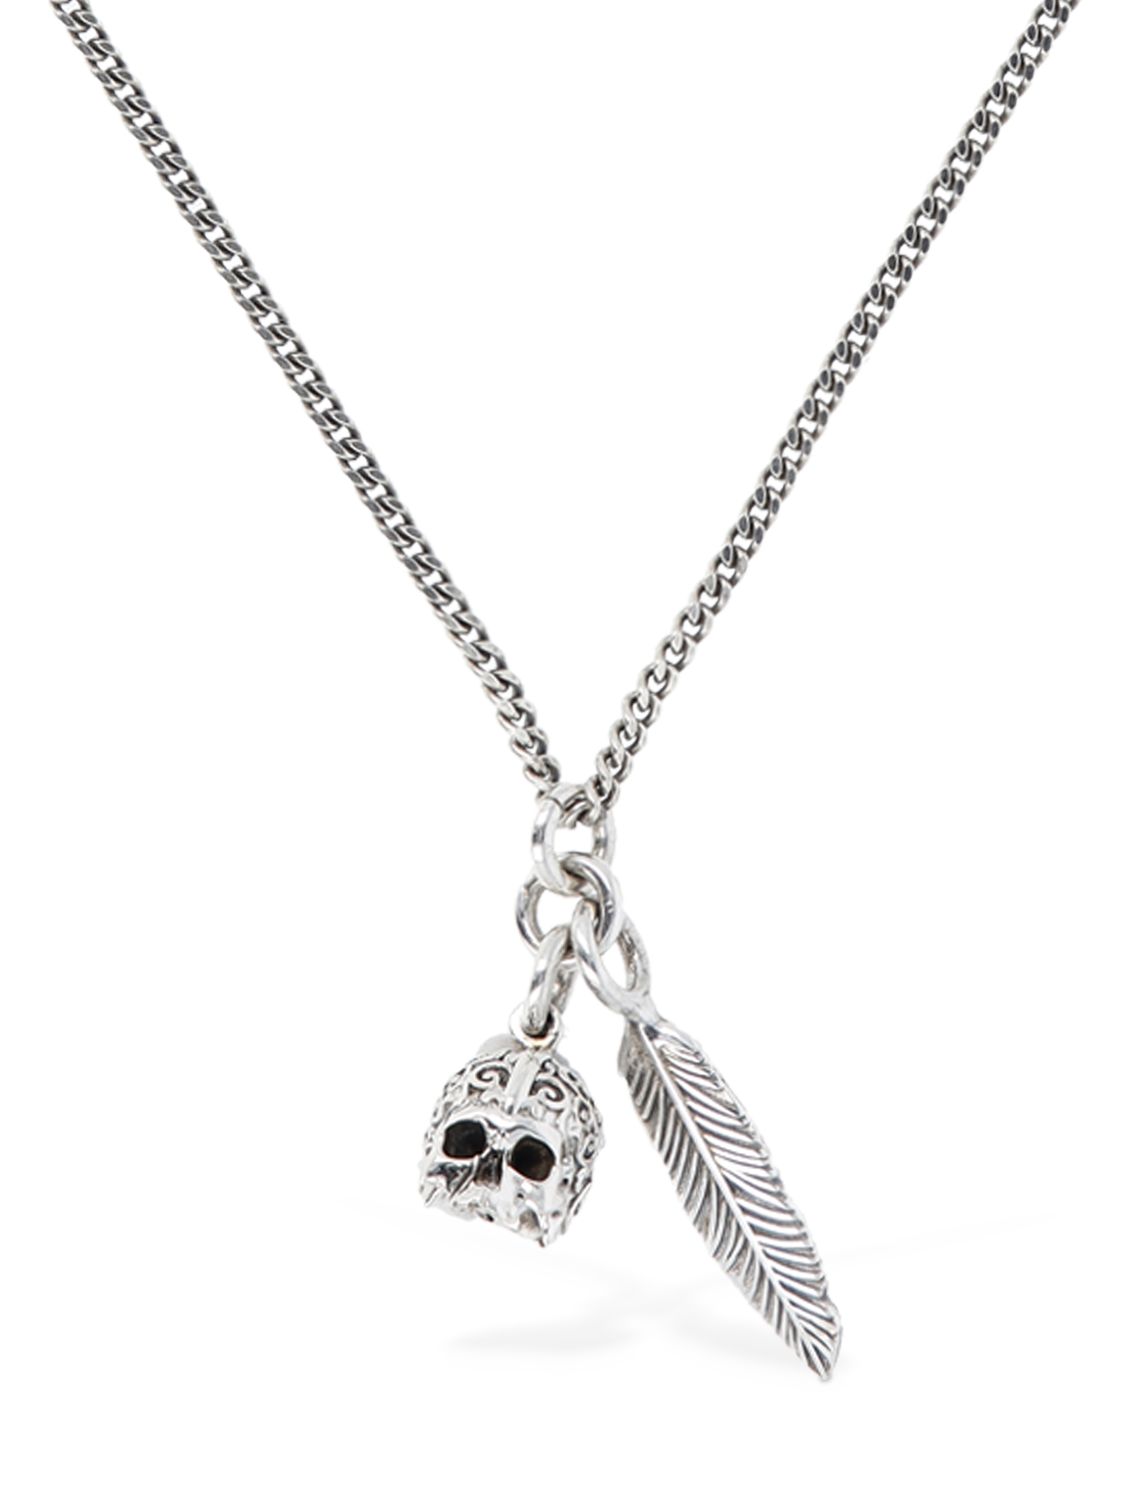 Feather & Skull Charm Necklace